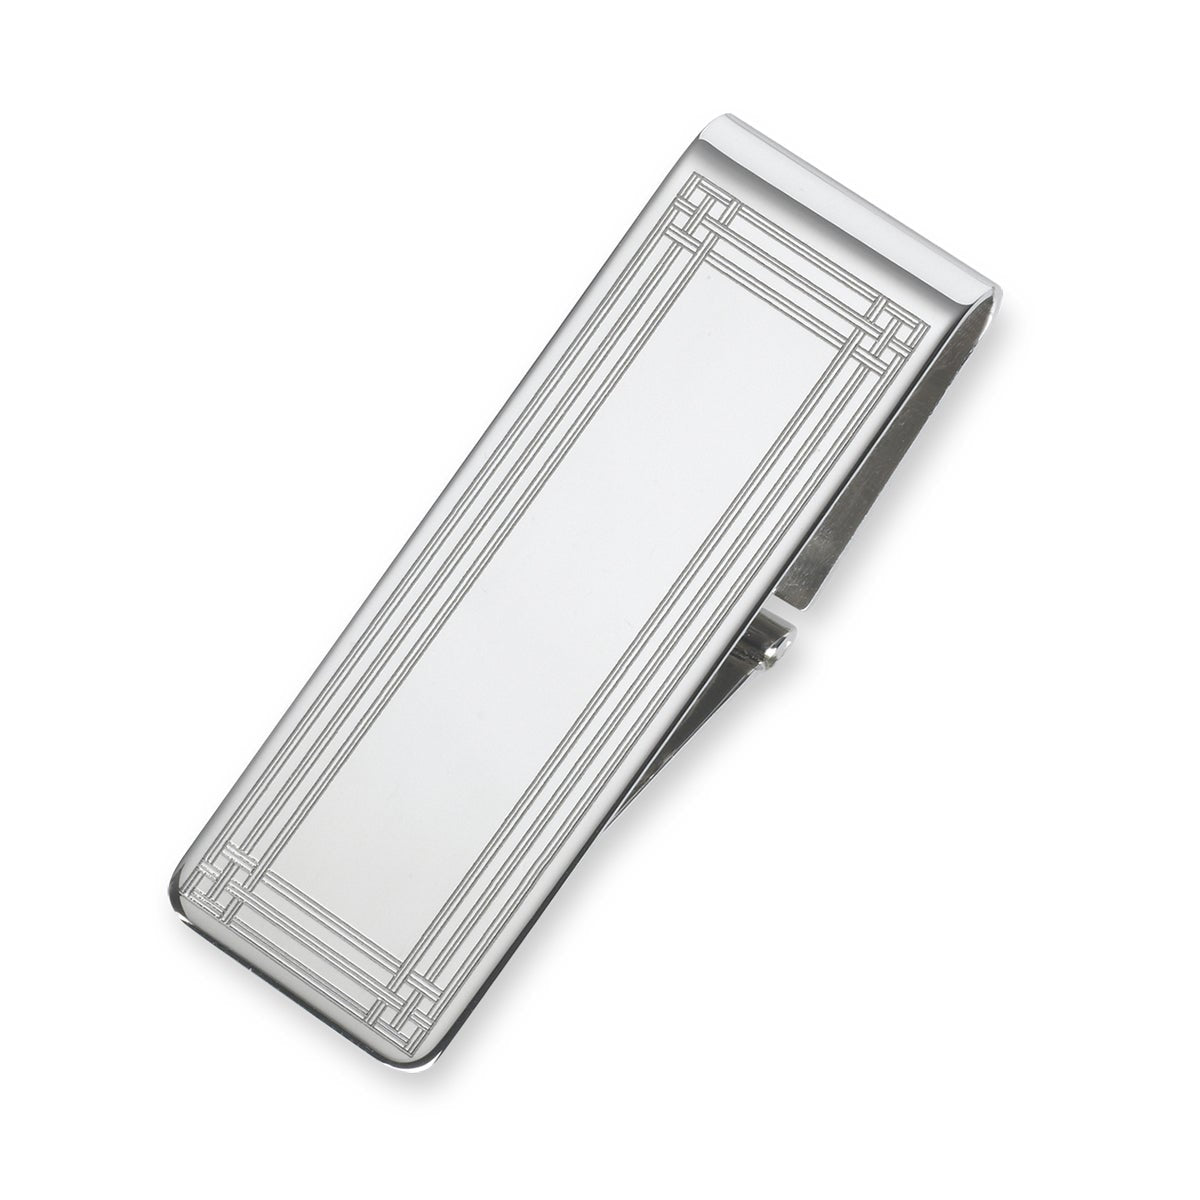 A hinged sterling silver engine-turned money clip displayed on a neutral white background.